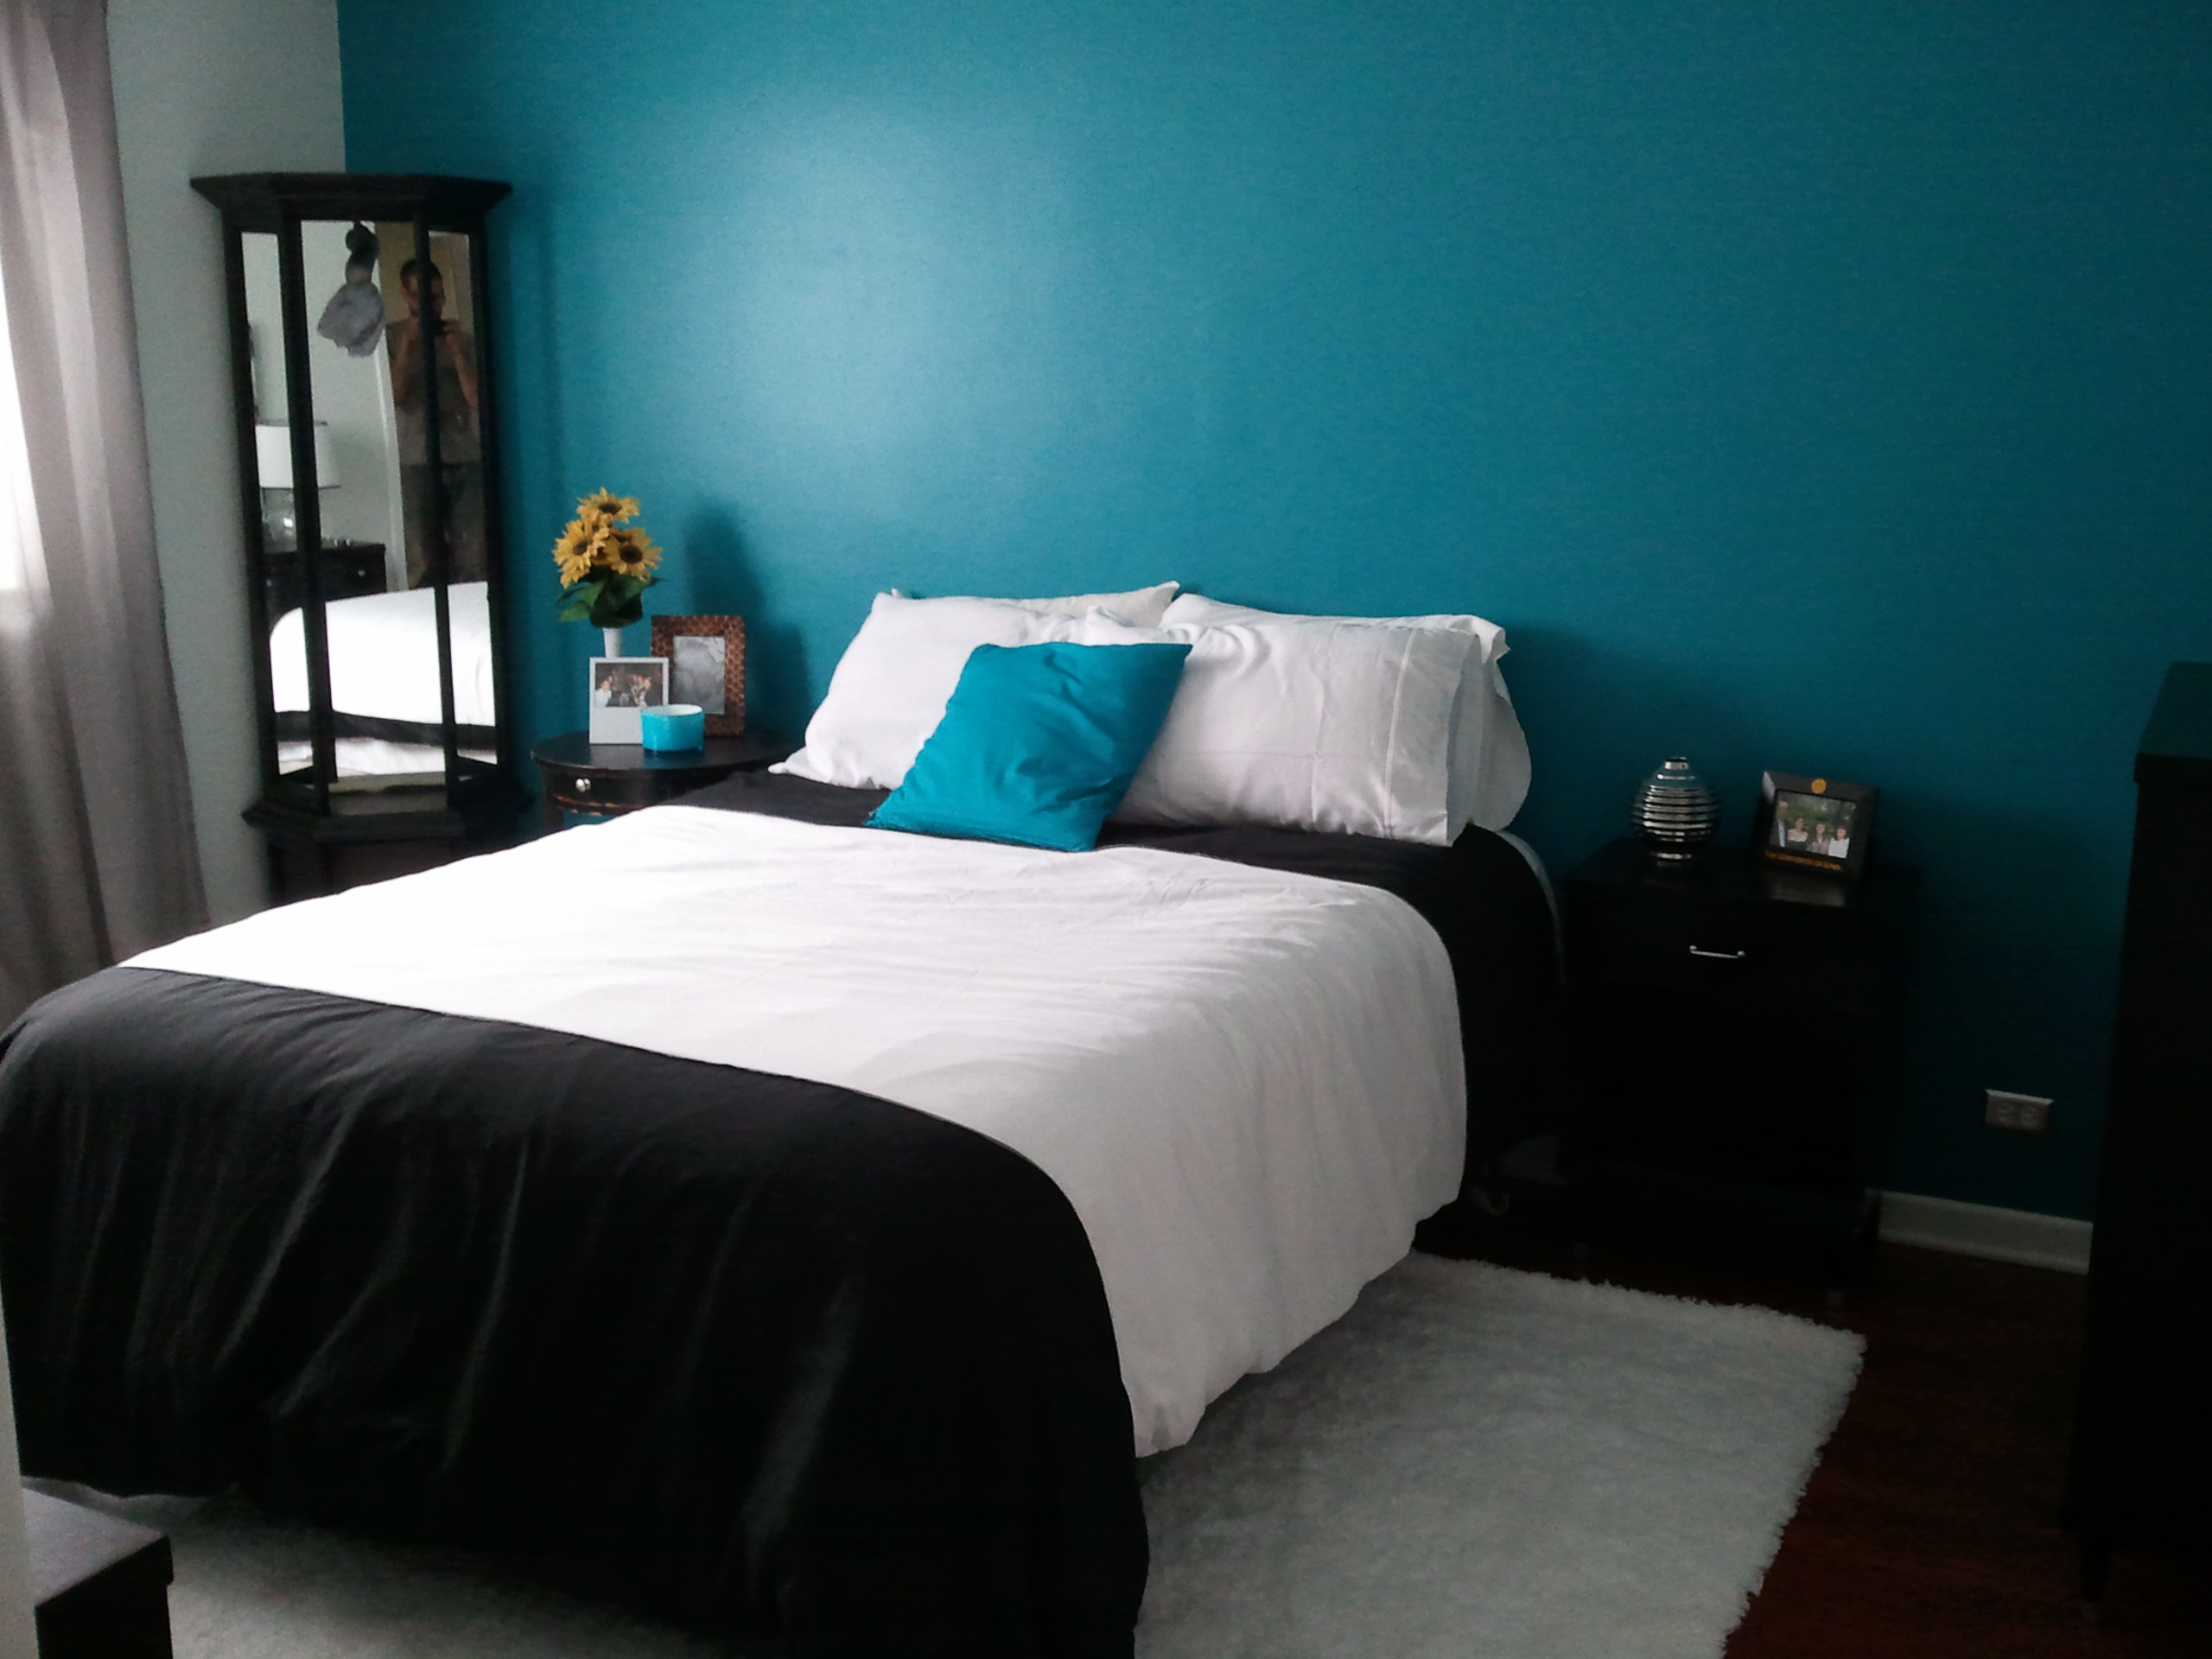 Teal Color Bedroom
 25 Teal Bedroom Designs You Will Love To Copy Decoration